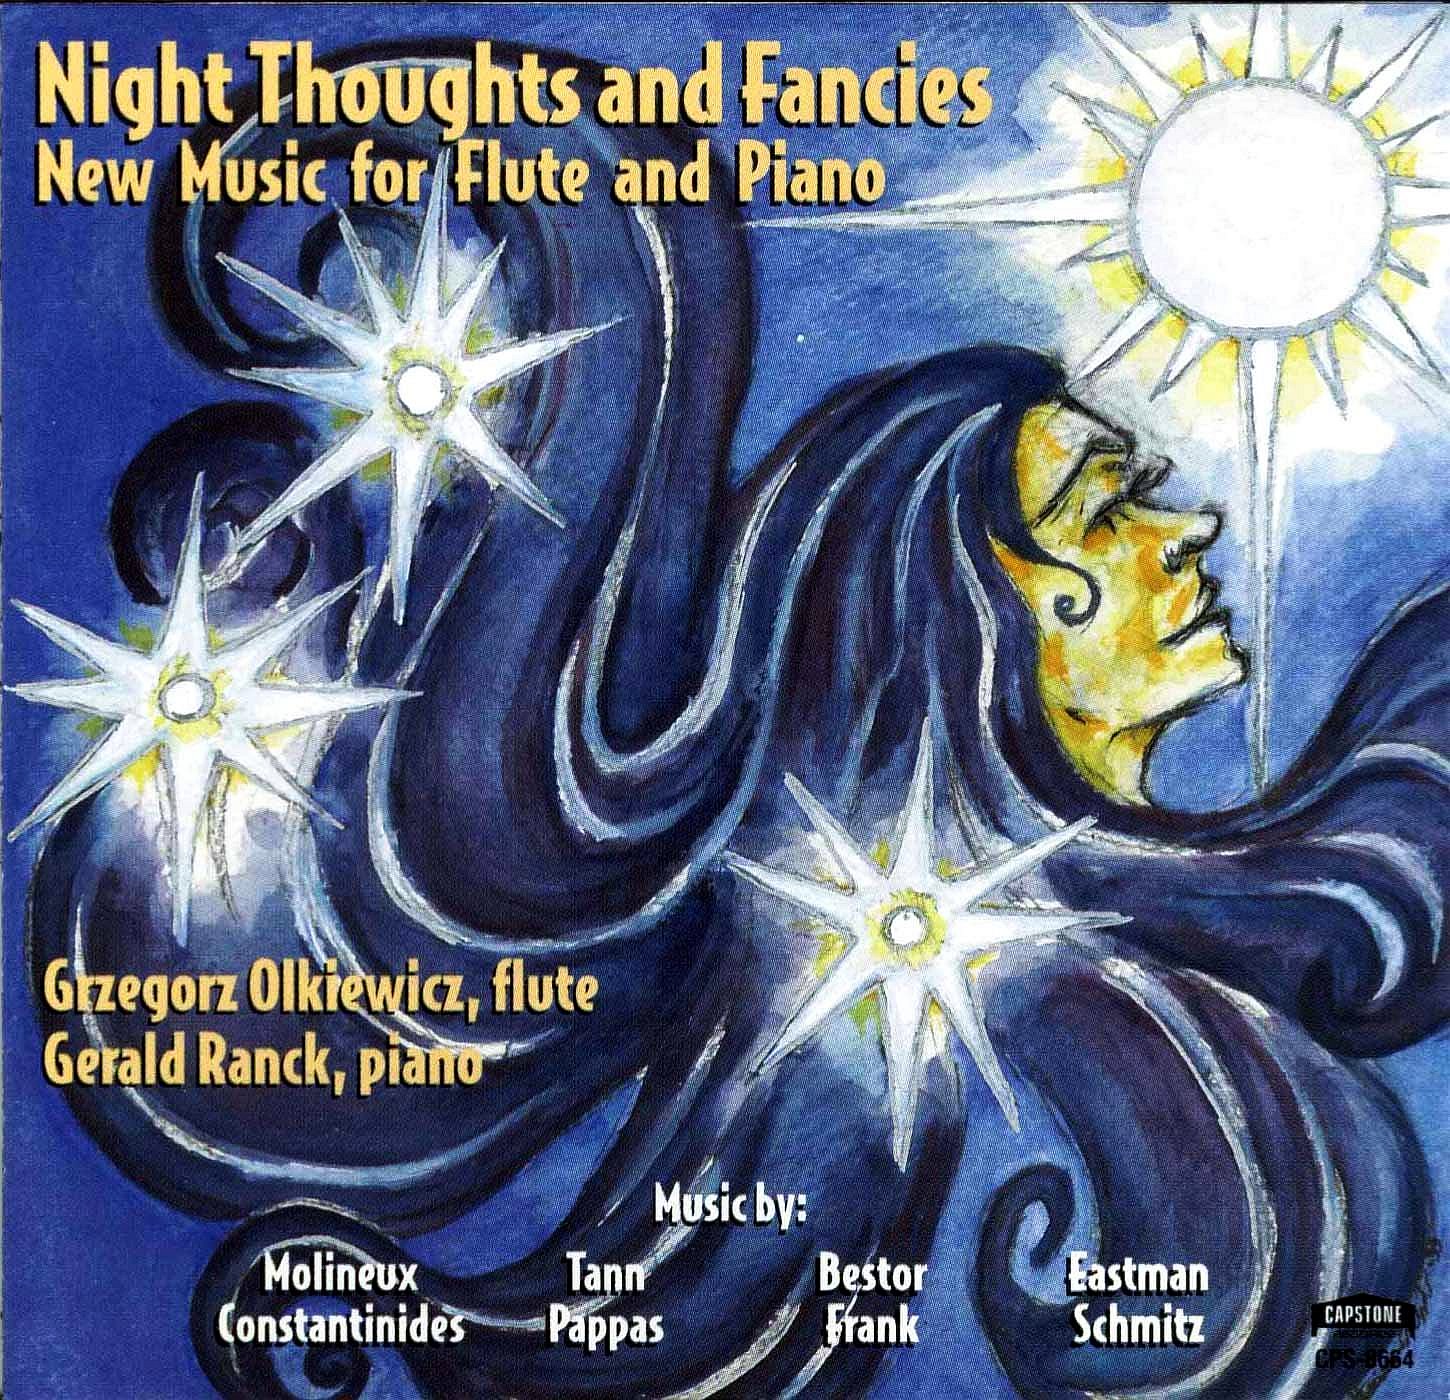 OLKIEWICZ GRZEGORZ, RANCK GERALD - Night Thoughts And Fancies. New Music For Flute And Piano